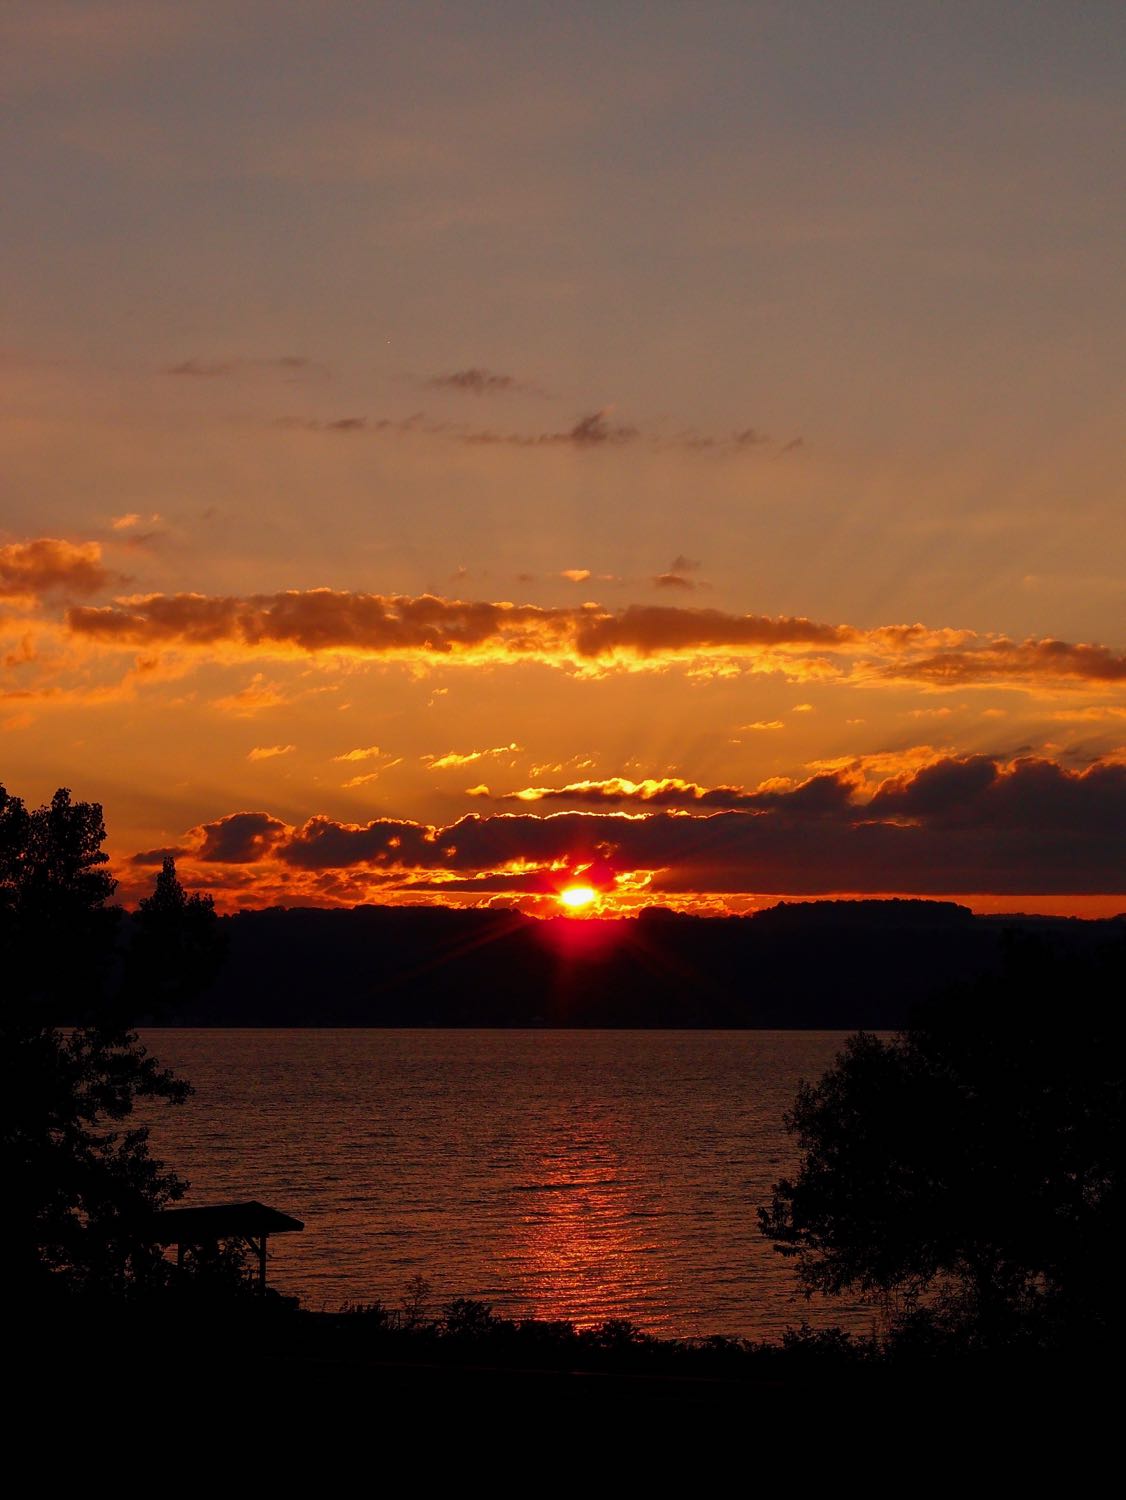 Sunrise over Cayuga Lake, sun between the hills and some clouds with subtle rays radiating outward.